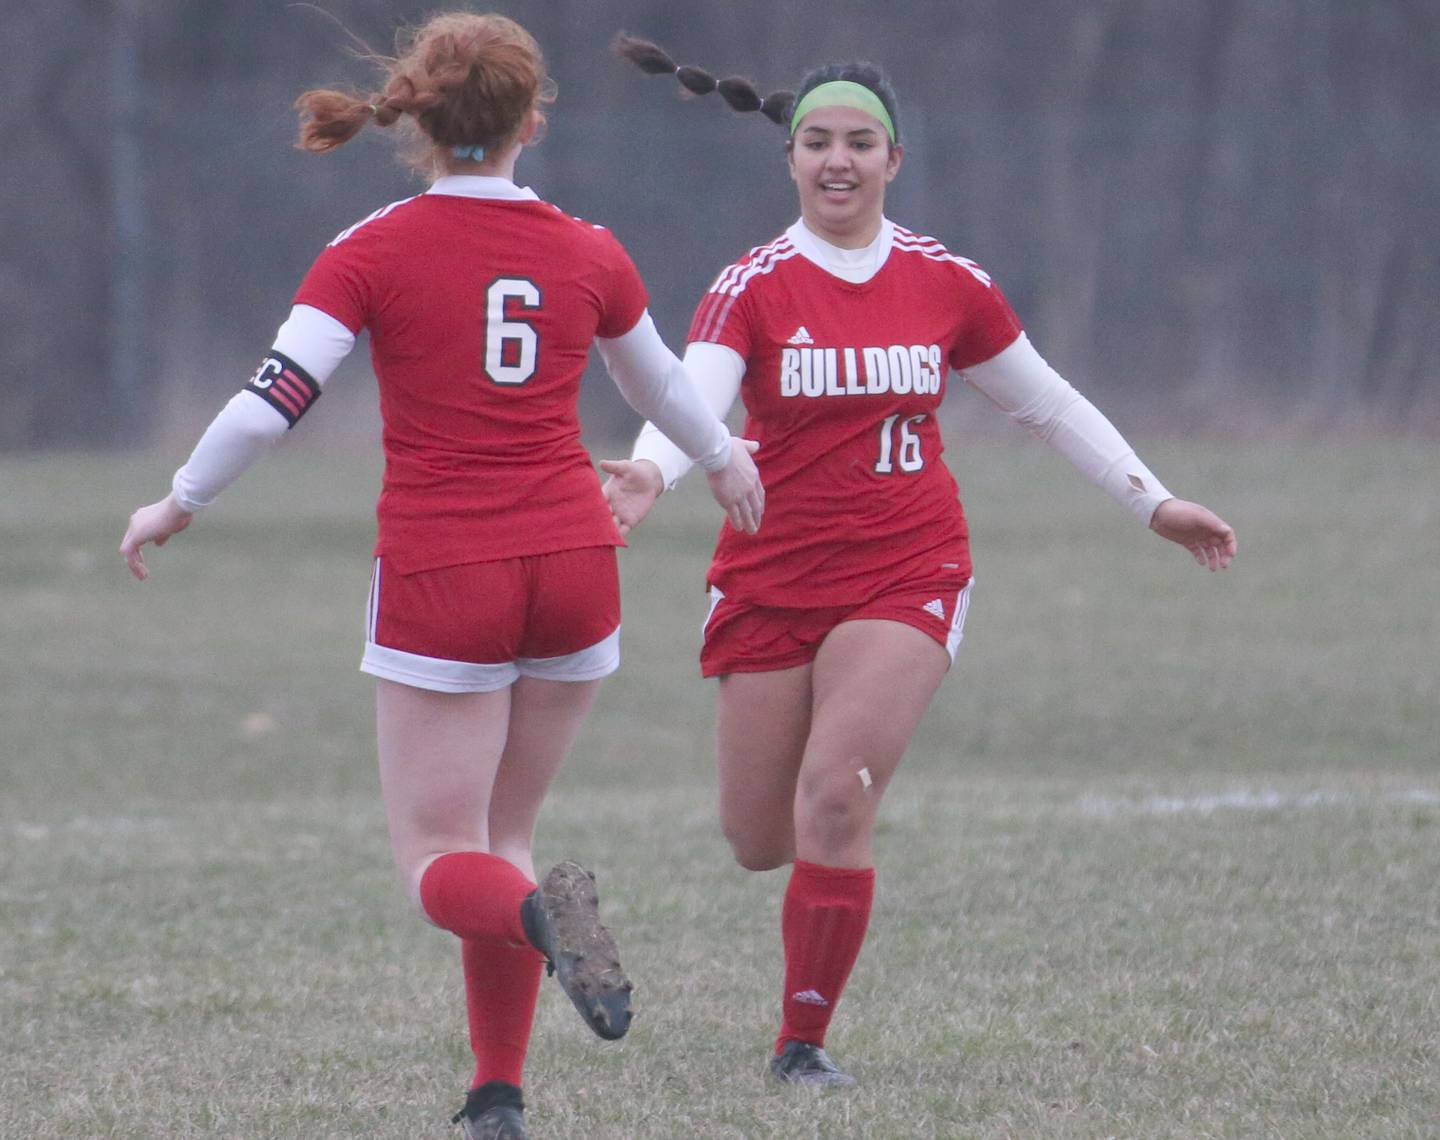 Streator's Ellie Isermann (6) congratulates teammate Zulima Gonzalez after Gonzalez scored the Bulldogs' second goal against L-P on Friday, March 24, 2023, at the Streator Family YMCA.